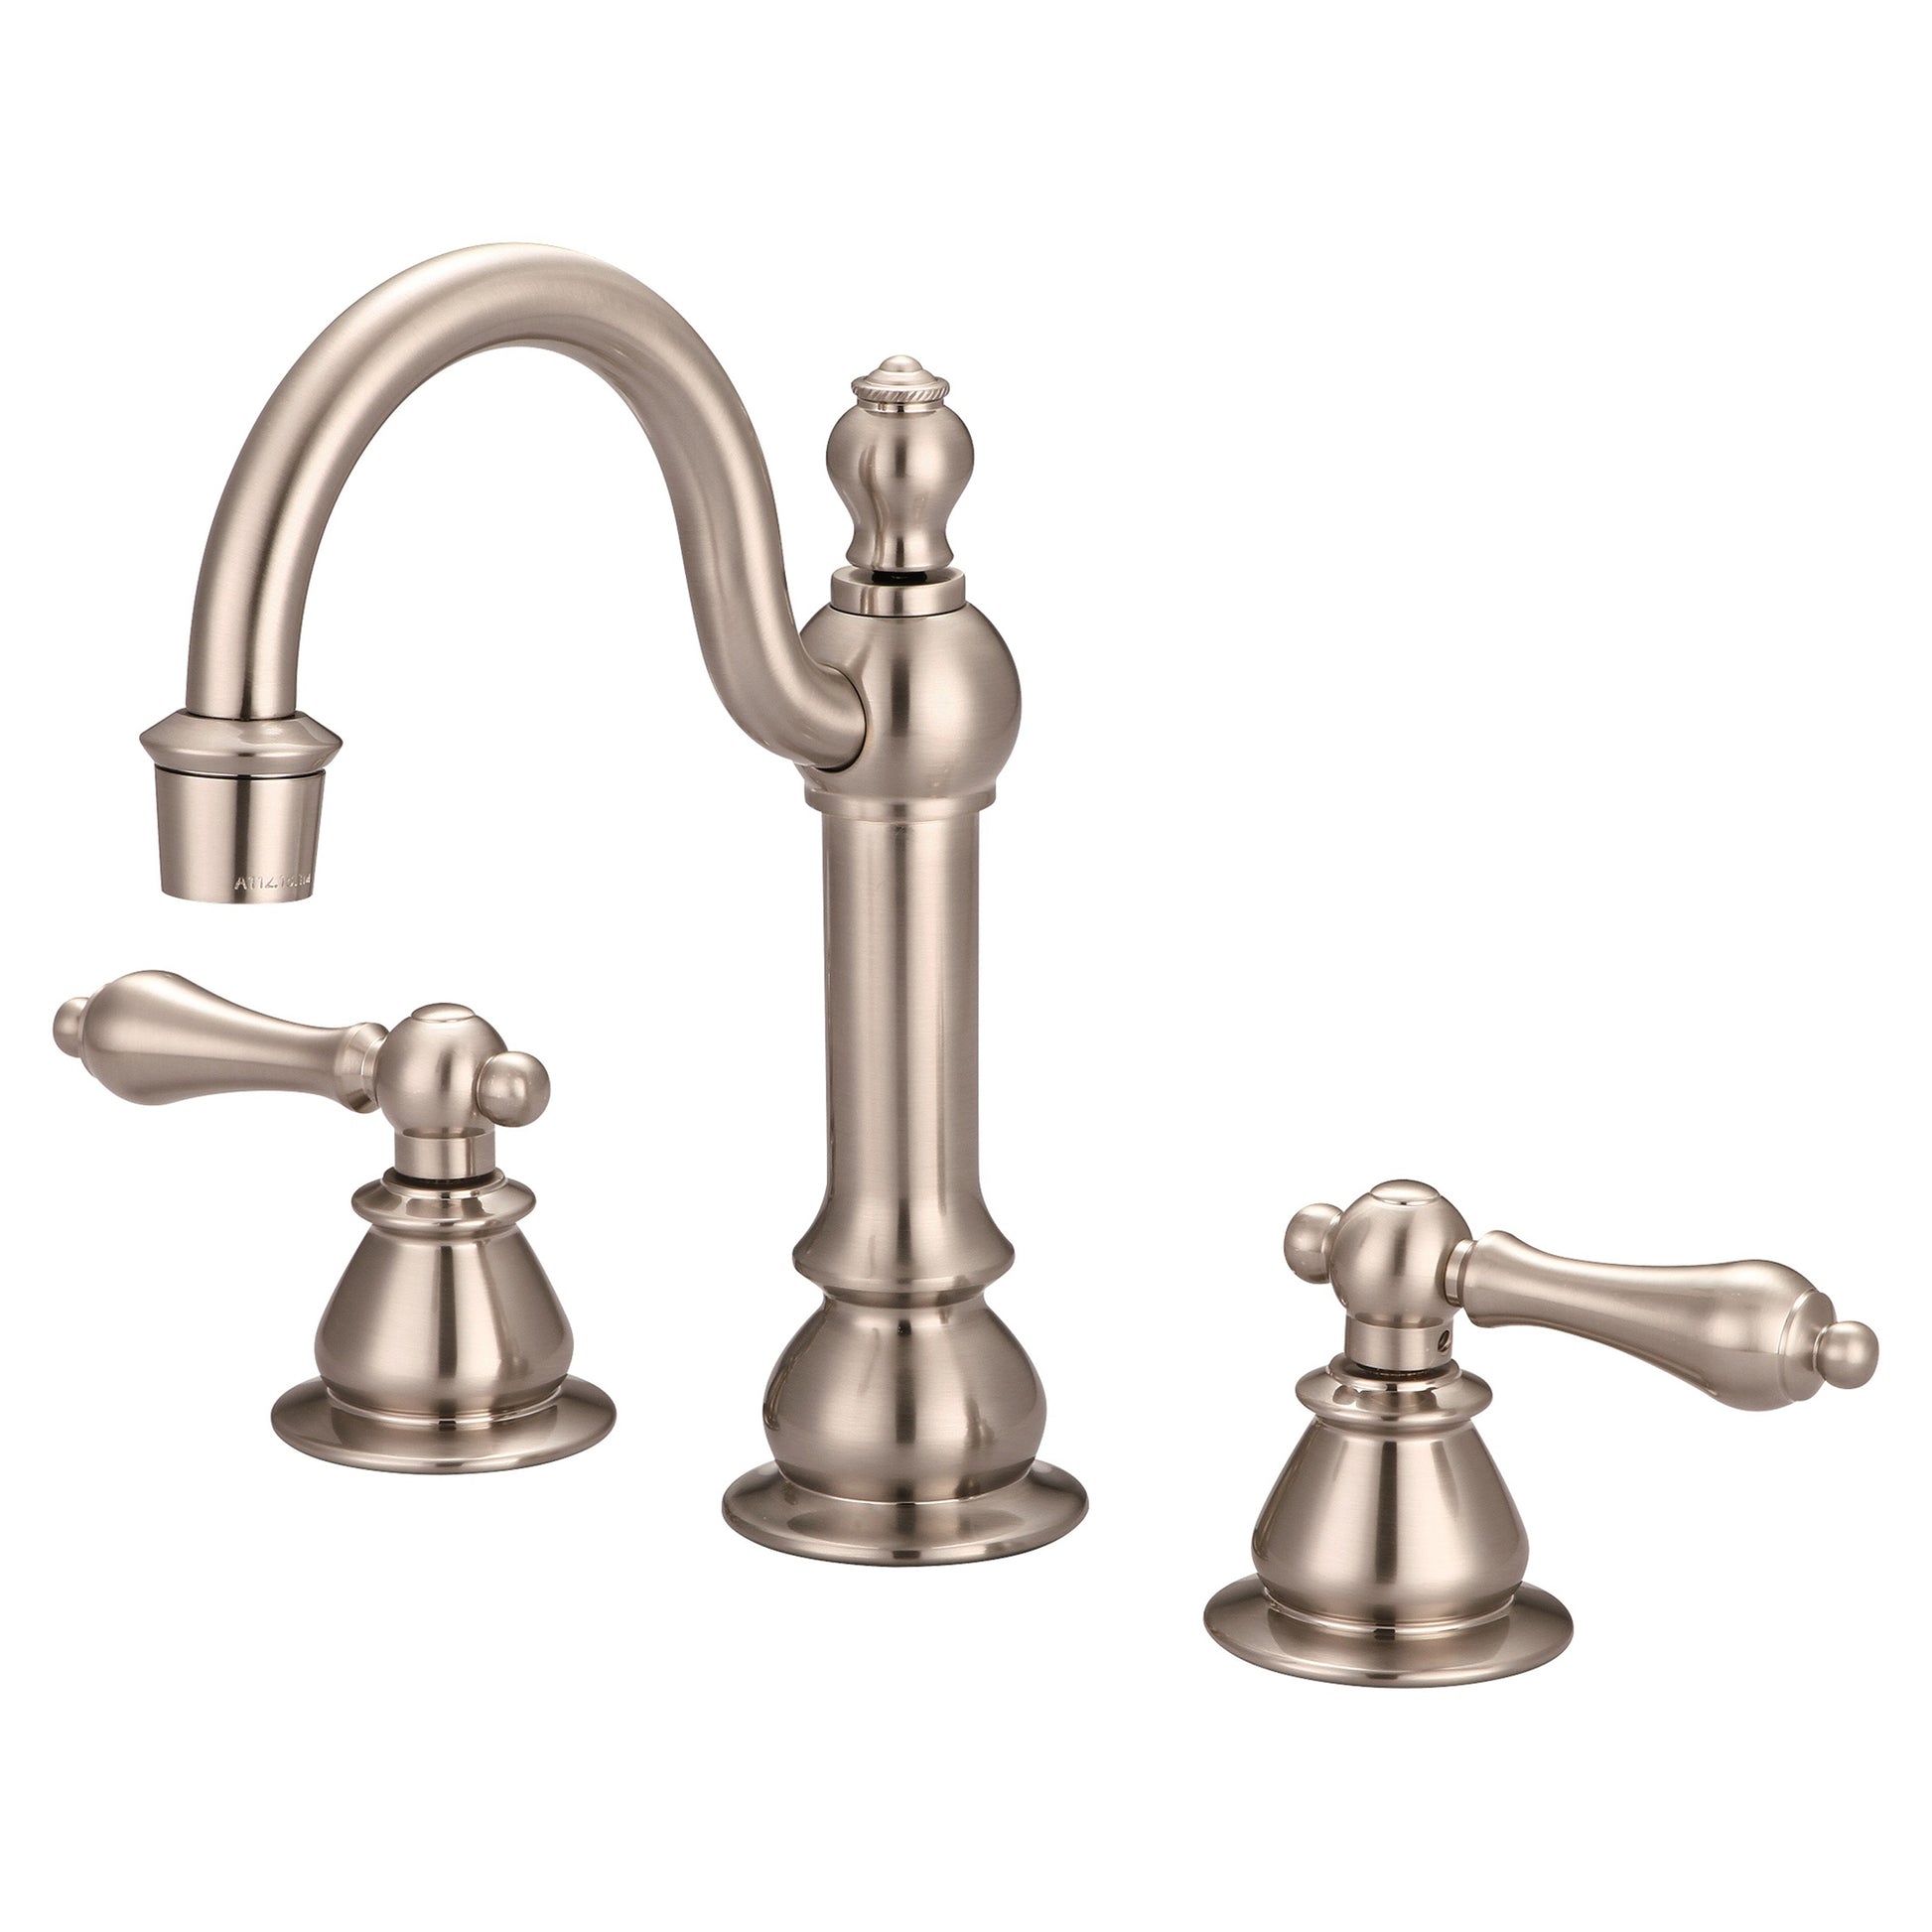 American 20th Century Classic Widespread Bathroom F2-0012 Faucets With Pop-Up Drain in Brushed Nickel Finish, With Metal Lever Handles